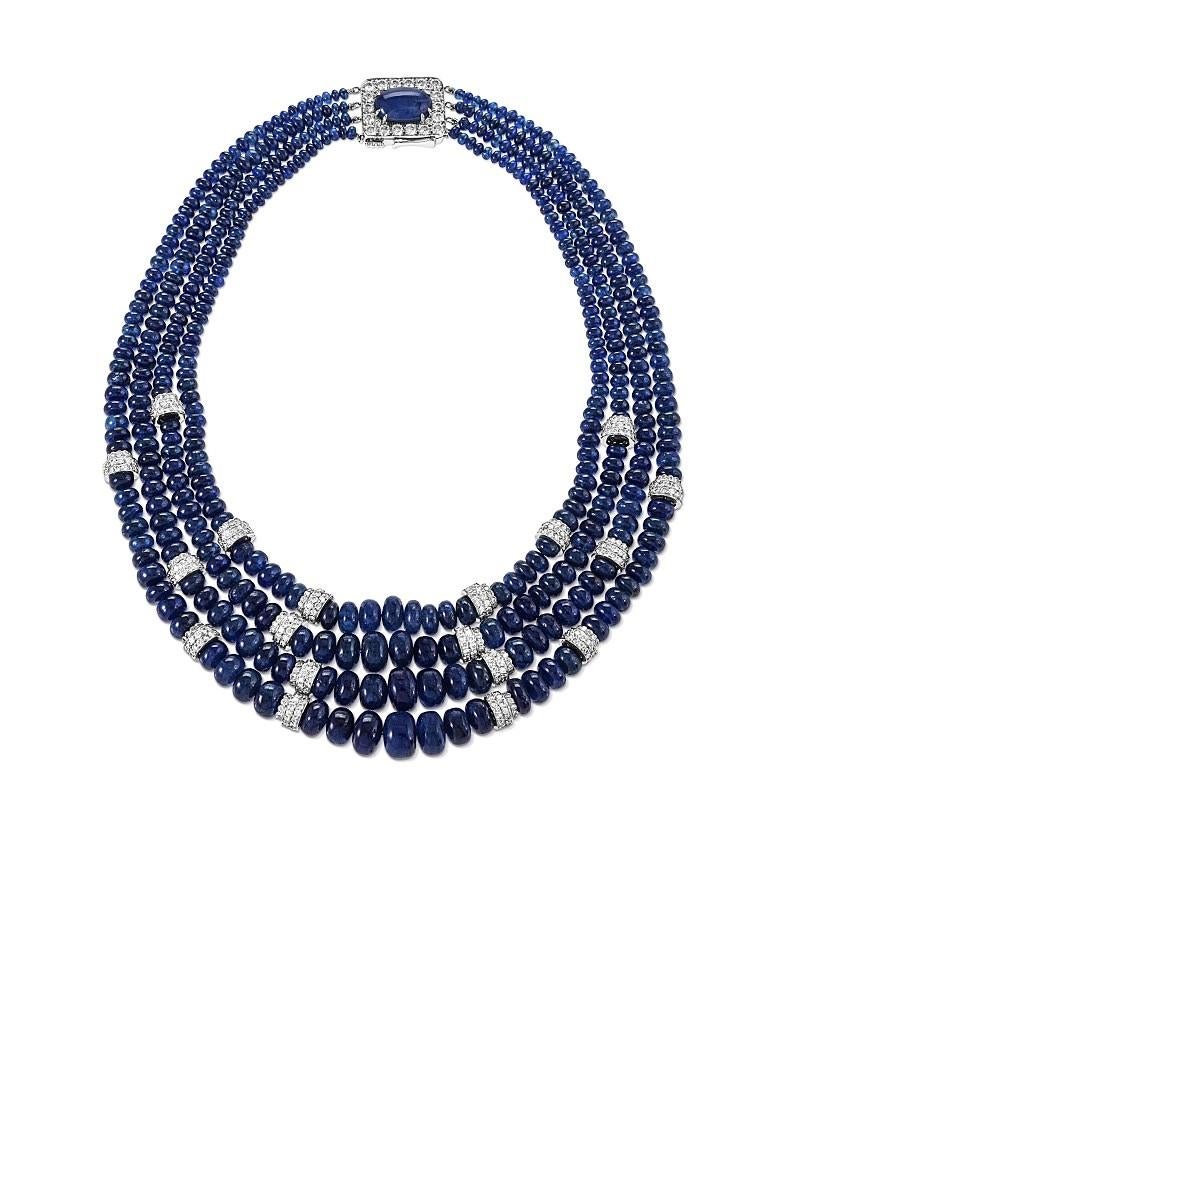 n American Late-20th Century platinum and 18 karat white gold necklace with sapphires and diamonds by David Webb. The necklace is composed of graduating sapphire beads with an approximate total weight of 500 carats, completed by a cabochon sapphire